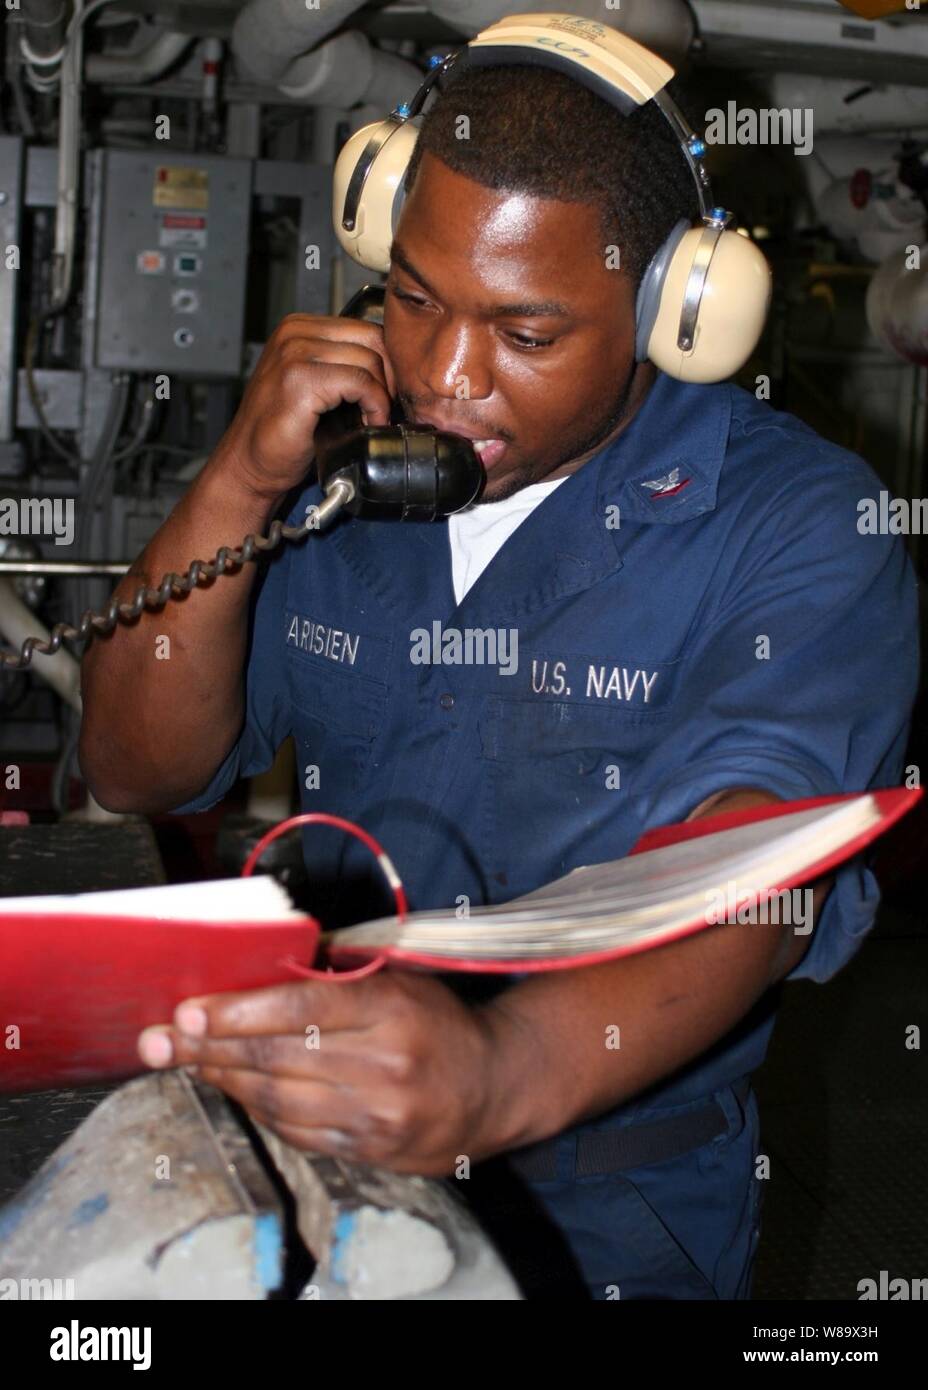 U.S. Navy Petty Officer 3rd Class Paris Pharisien gives a status report during a roving watch aboard the amphibious transport dock ship USS San Antonio (LPD 17) underway in the Persian Gulf on Dec. 2, 2008.  The San Antonio is deployed with the Iwo Jima Expeditionary Strike Group to support maritime security operations in the U.S. 5th Fleet area of responsibility. Stock Photo